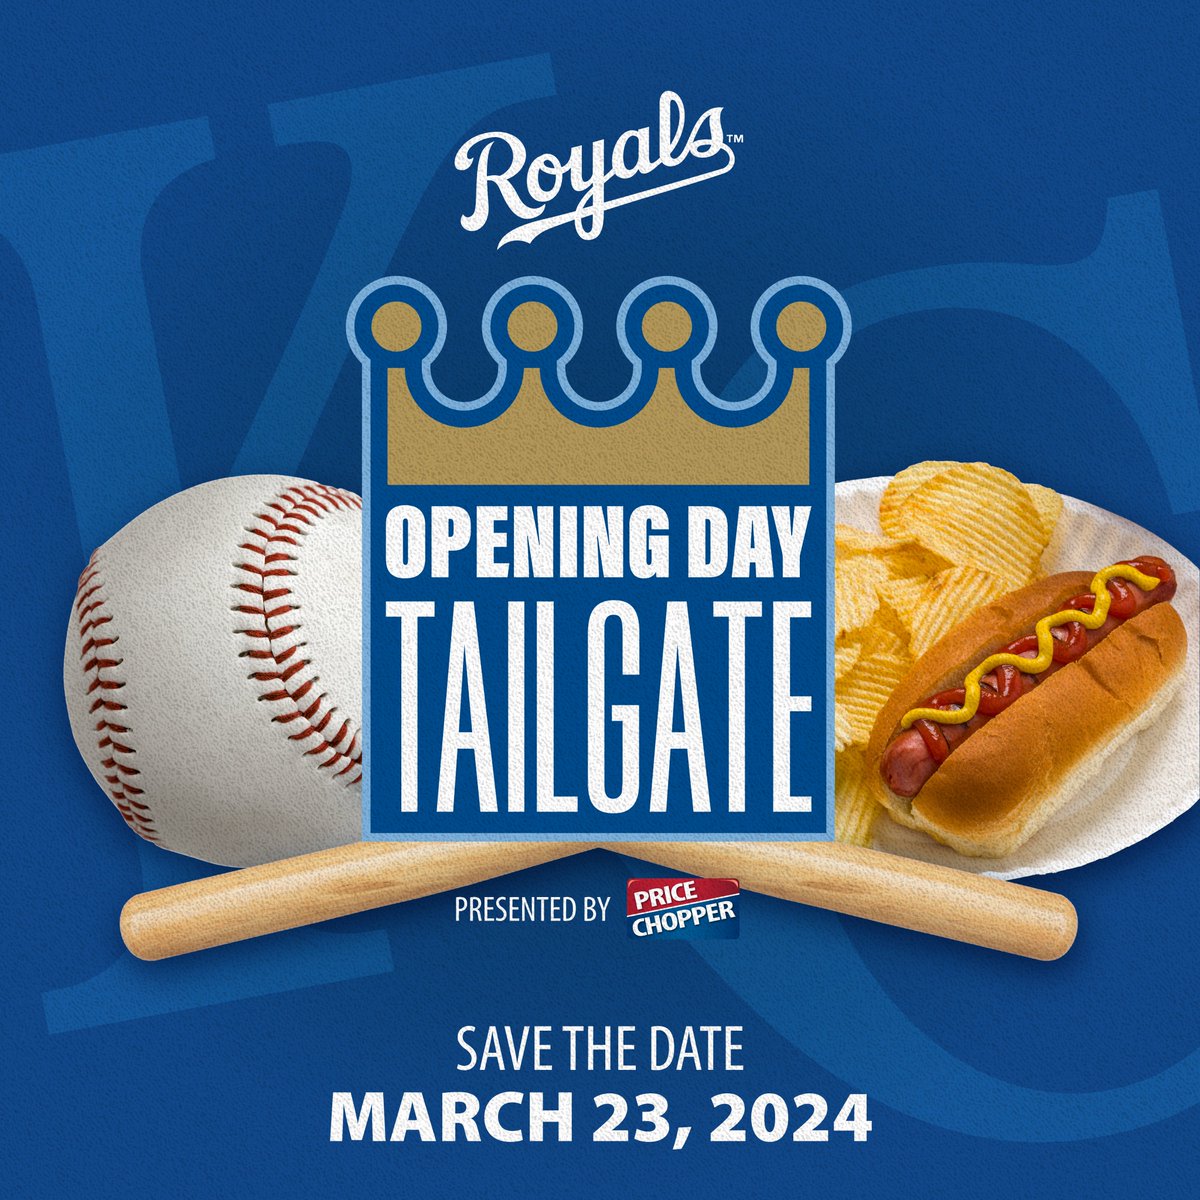 Are you ready to kick off the @Royals season? Price Chopper is teaming up with the @KCRoyalsFdn to feed Kansas City! Stop by your local Price Chopper Saturday, 3/23, starting at 11 am for a taste of the ballpark. Mark your calendars and we’ll see you there!